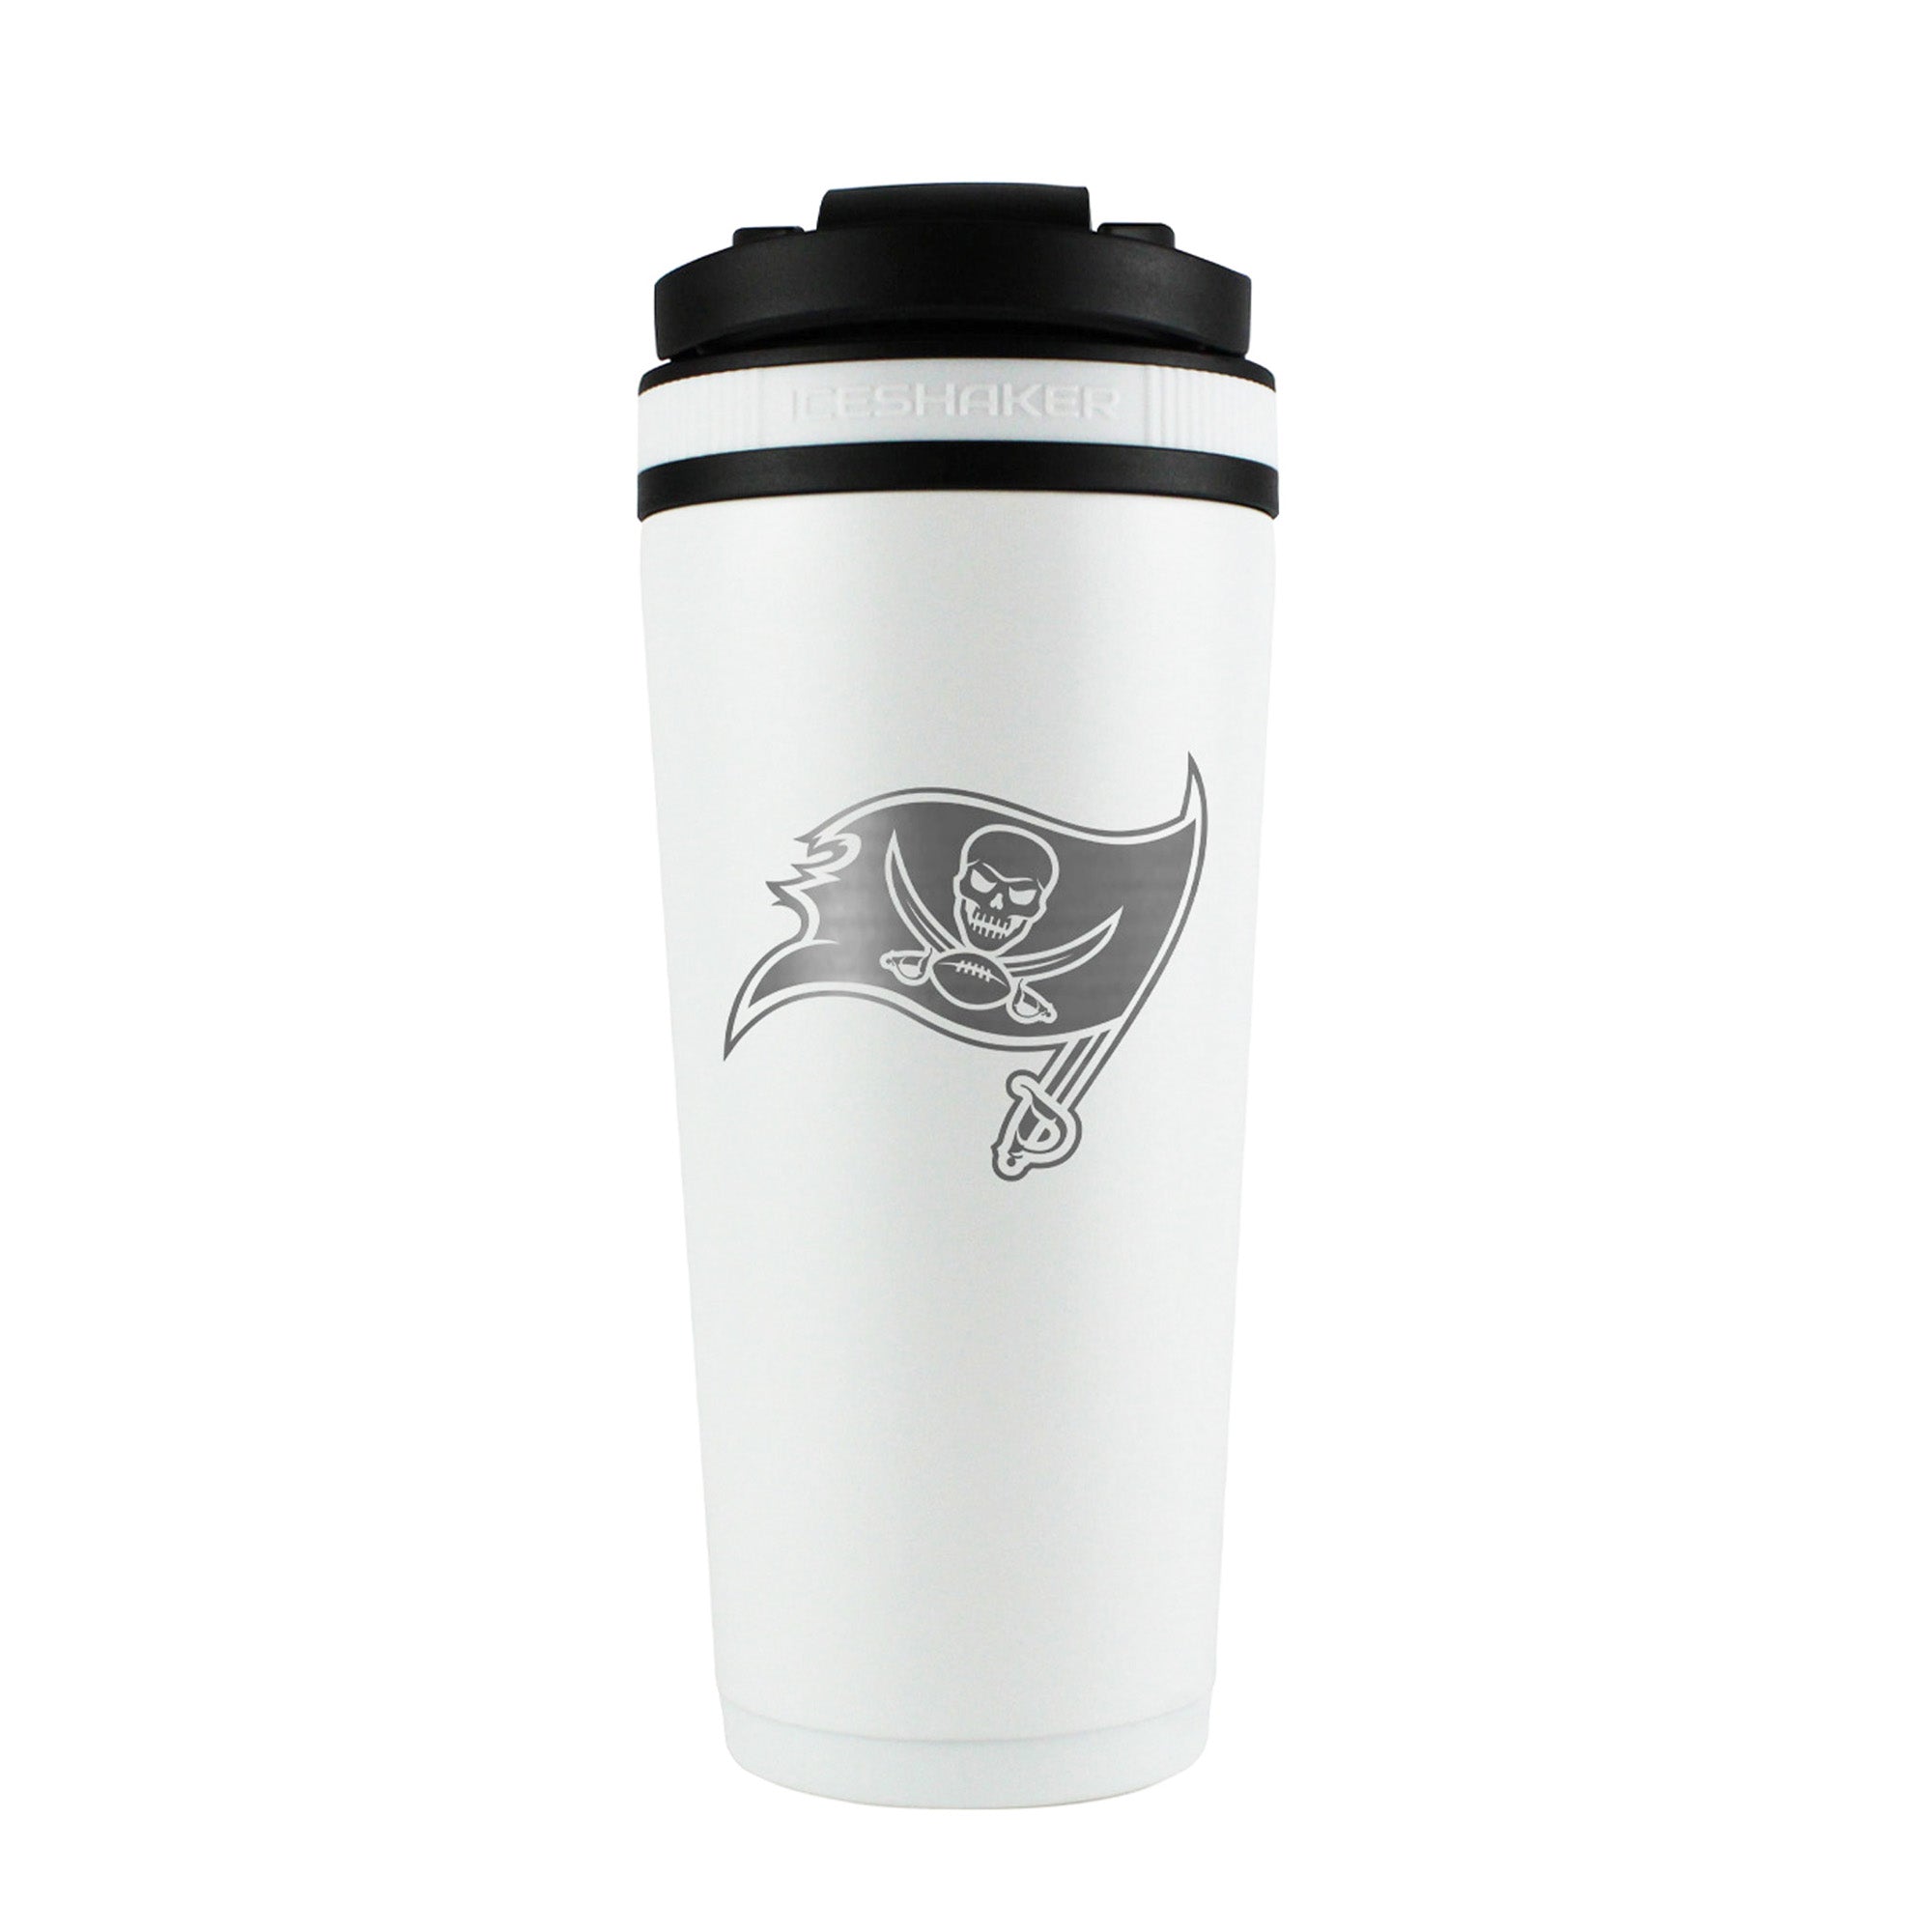 Officially Licensed Tampa Bay Buccaneers 26oz Ice Shaker - White